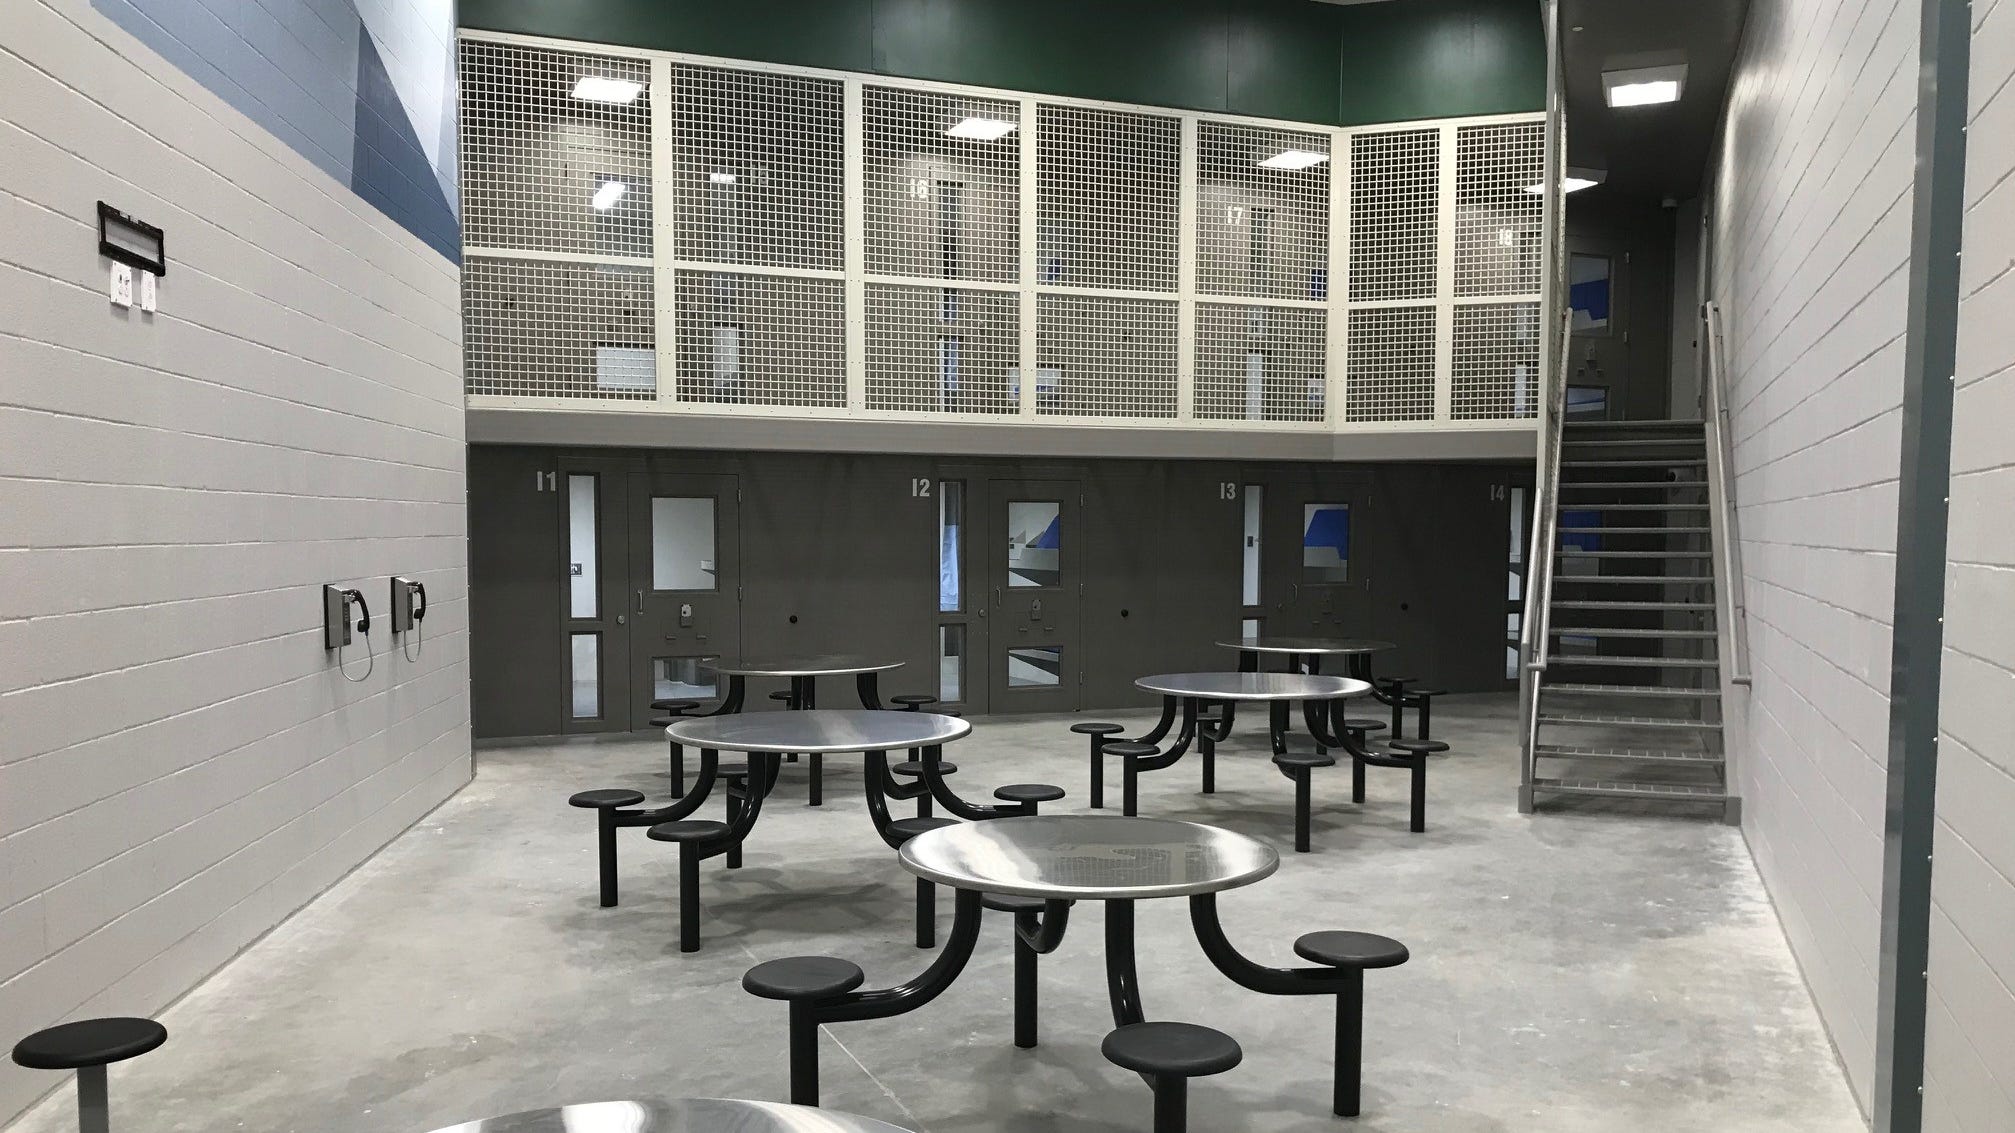 Inmates make the move to new Delaware County jail